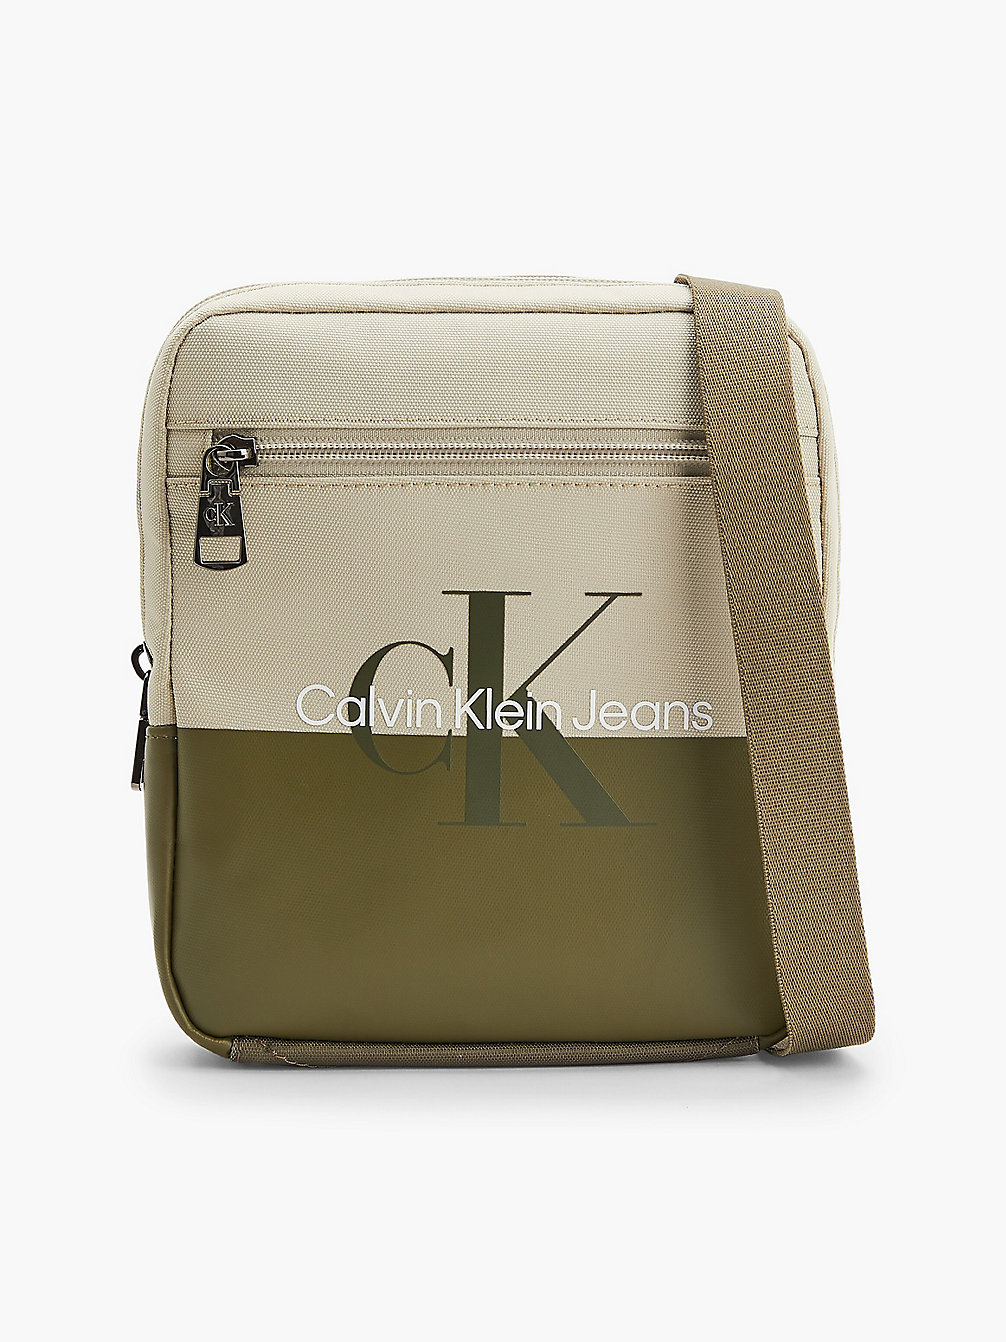 WHEAT FIELDS/BURNT OLIVE Recycled Polyester Crossbody Bag undefined men Calvin Klein